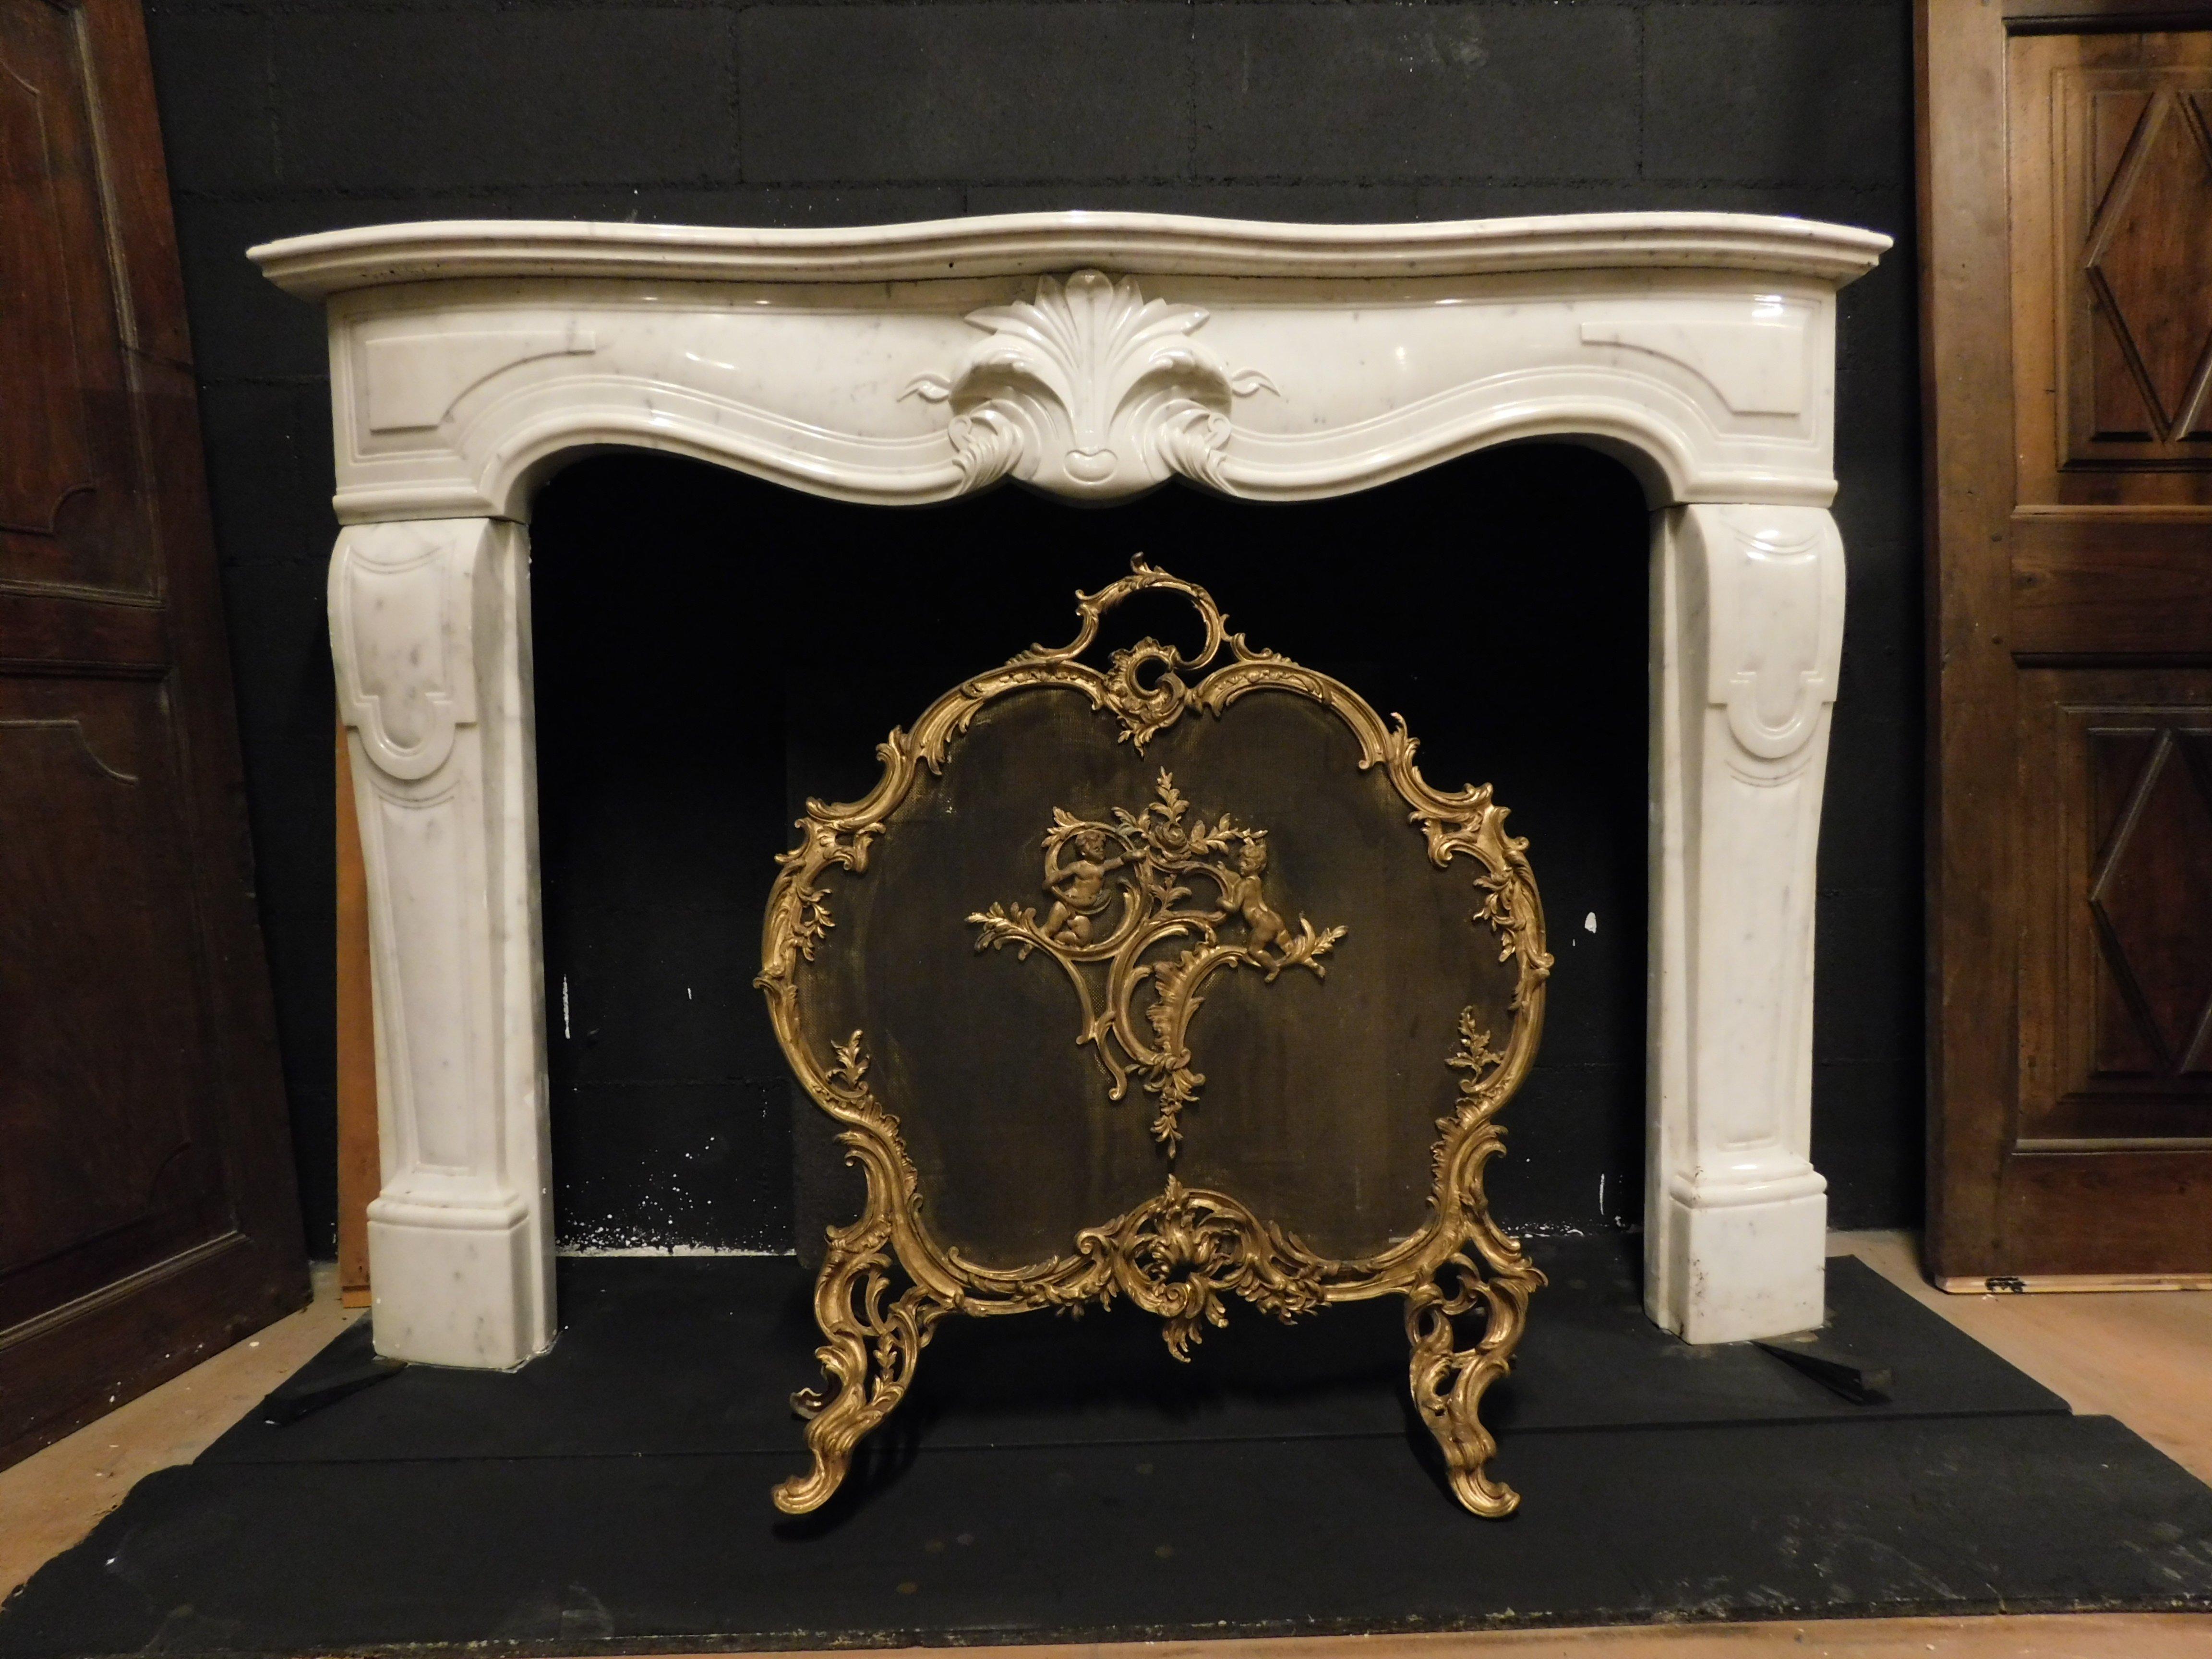 Antique fireplace mantle, richly carved in precious white marble with central leaf and wavy legs, from France, 19th century, very elegant and refined, to give a touch of classic elegance and chic taste to your prestigious interior, maximum